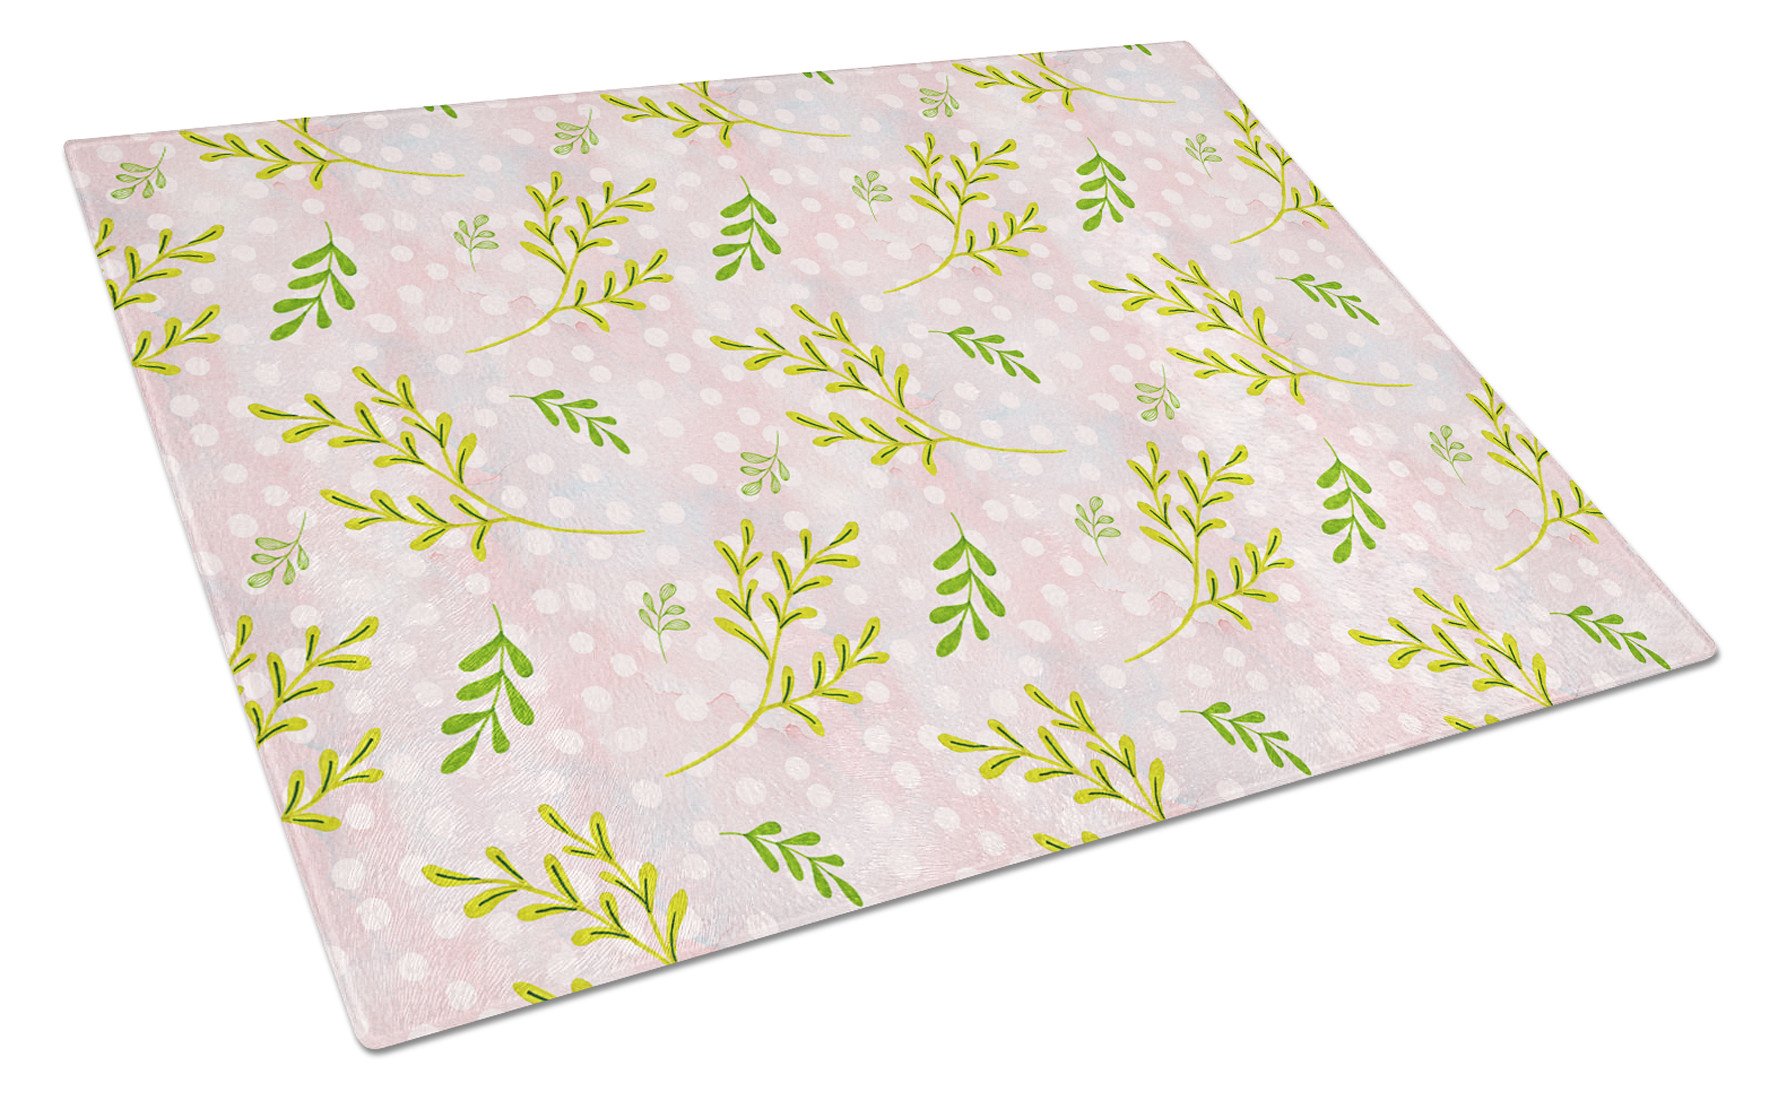 Watercolor Leaves Pink Glass Cutting Board Large BB7480LCB by Caroline's Treasures